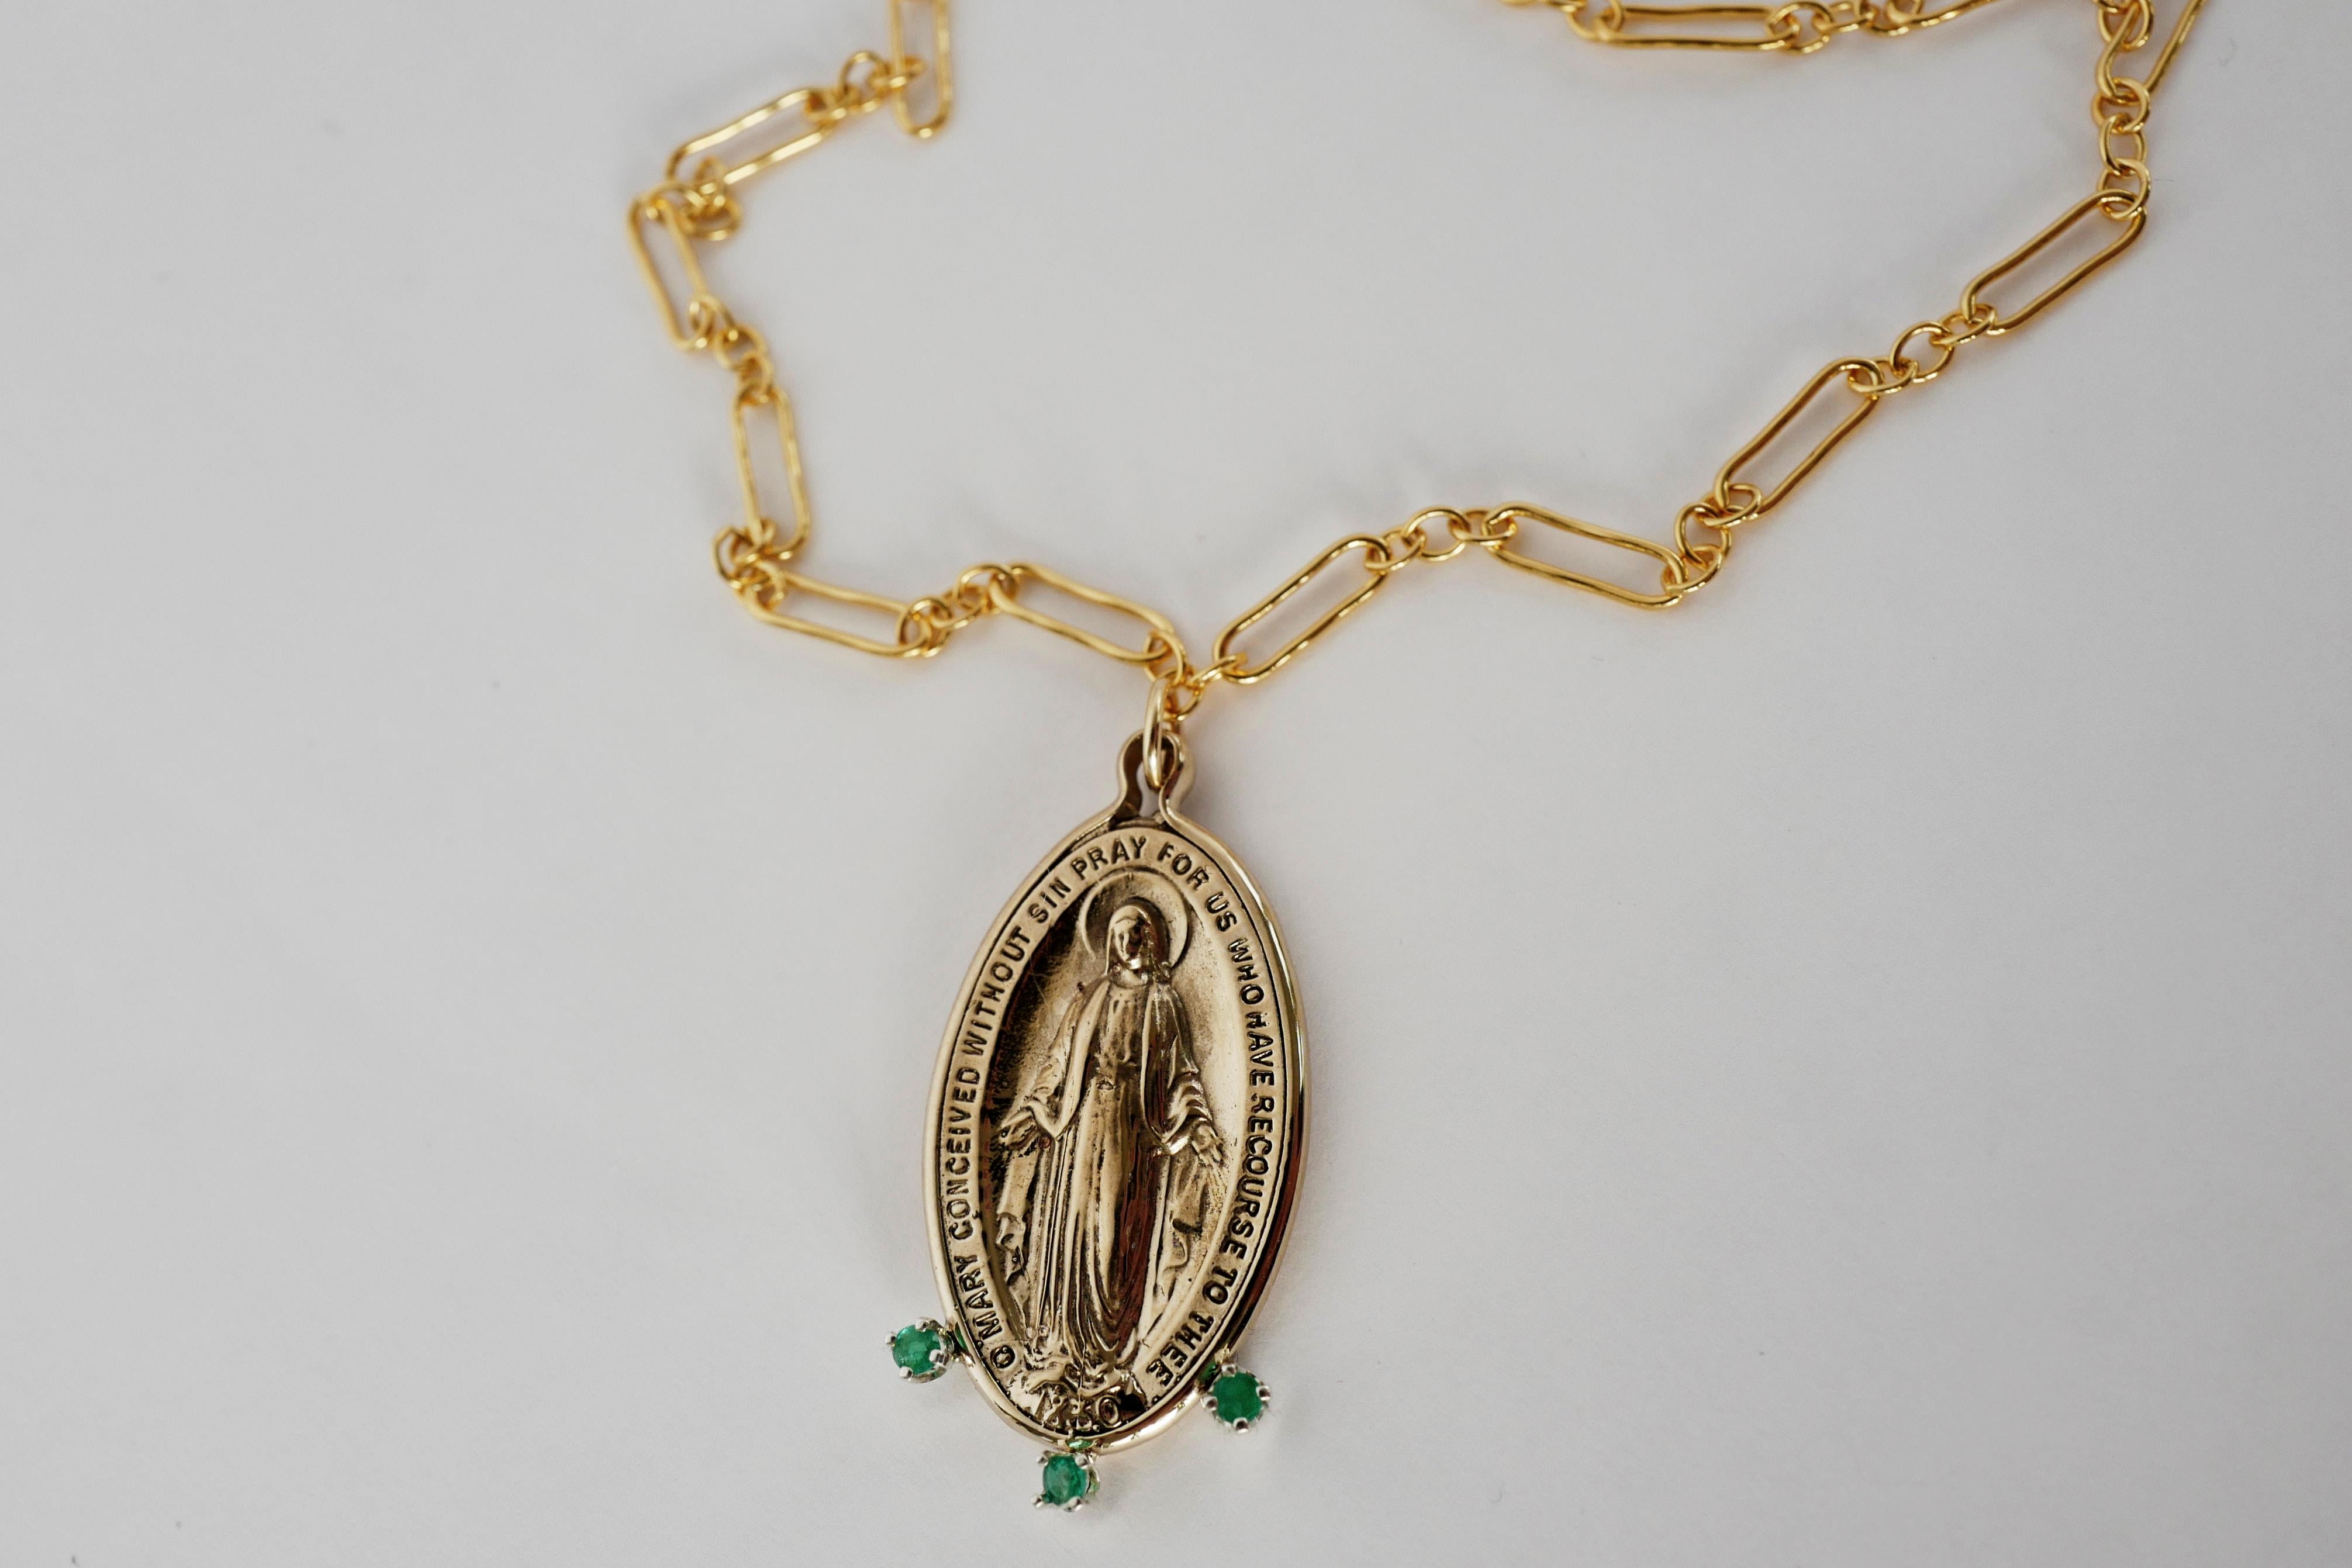 Round Cut Emerald Virgin Mary Medal Chunky Chain Necklace Bronze Gold Filled J Dauphin For Sale